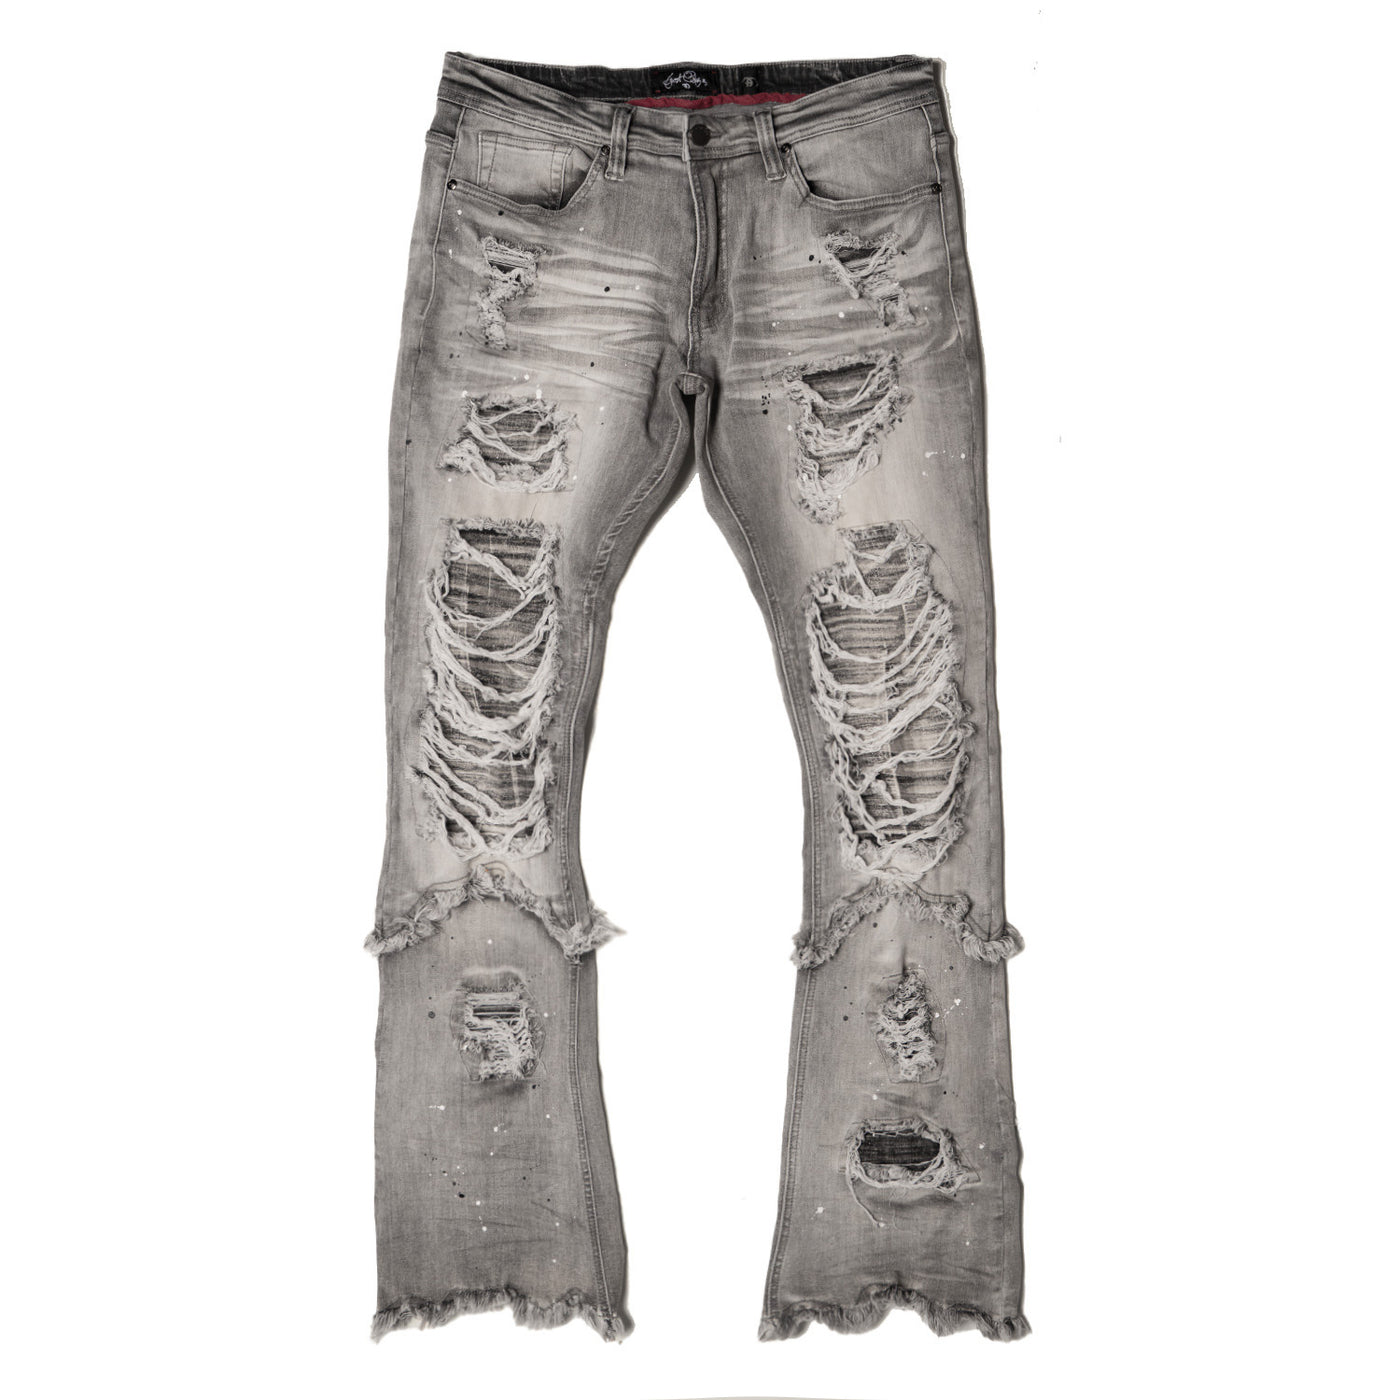 F1788 Rogue 36" Stack Jeans - Grey